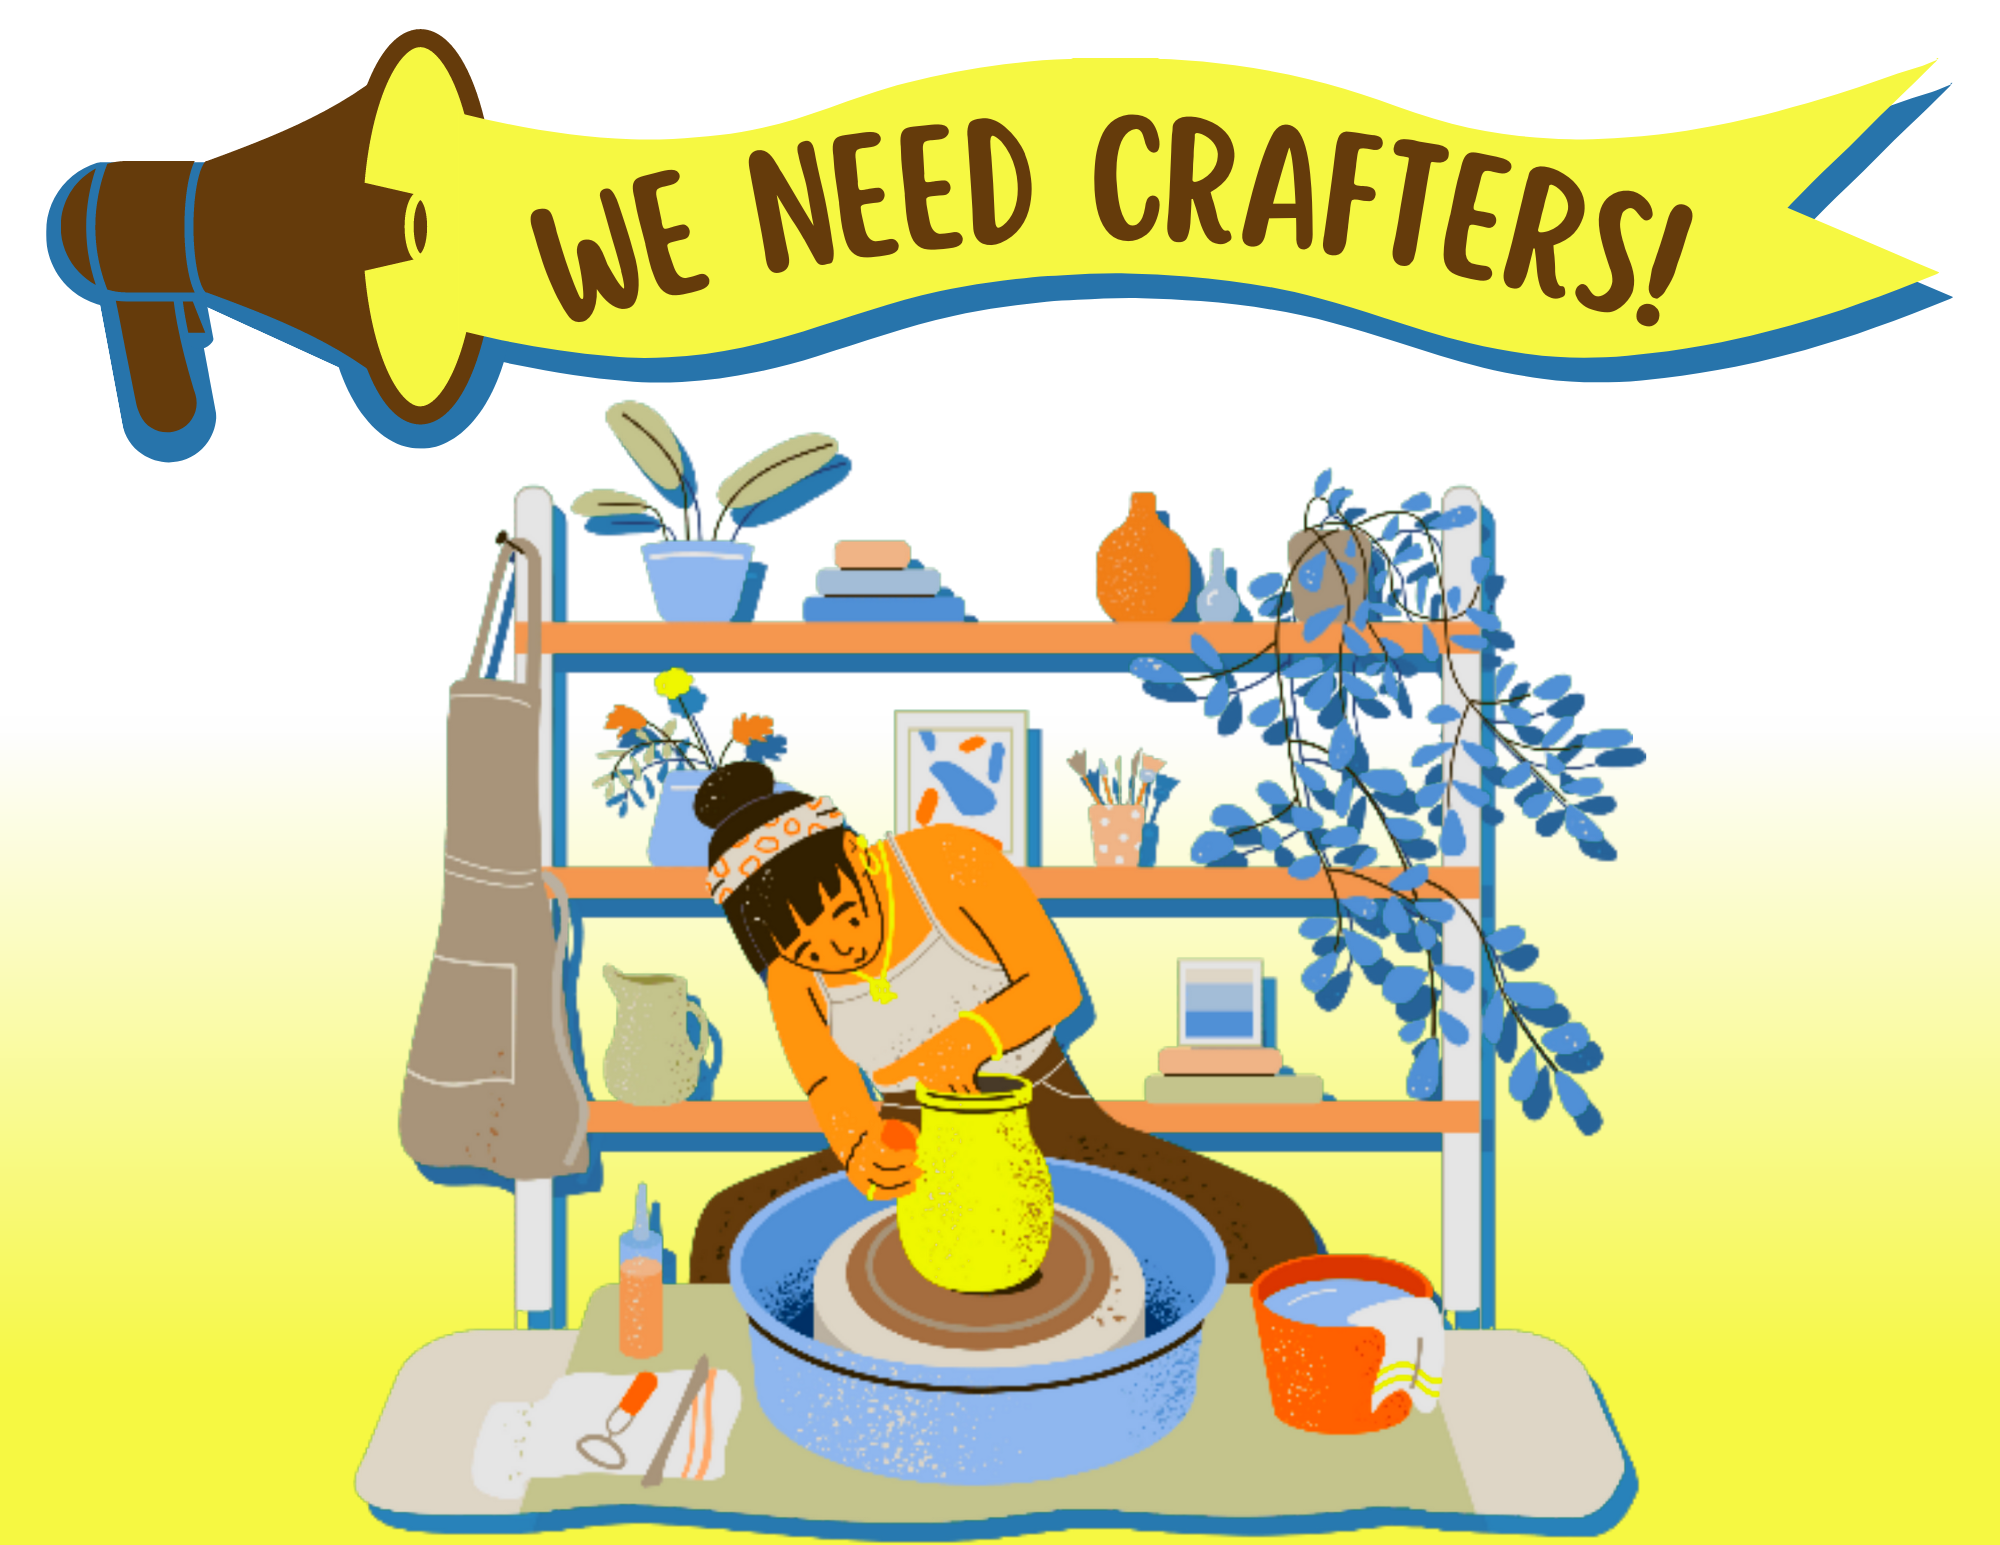 woman spinning pottery banner reads "we need crafters"